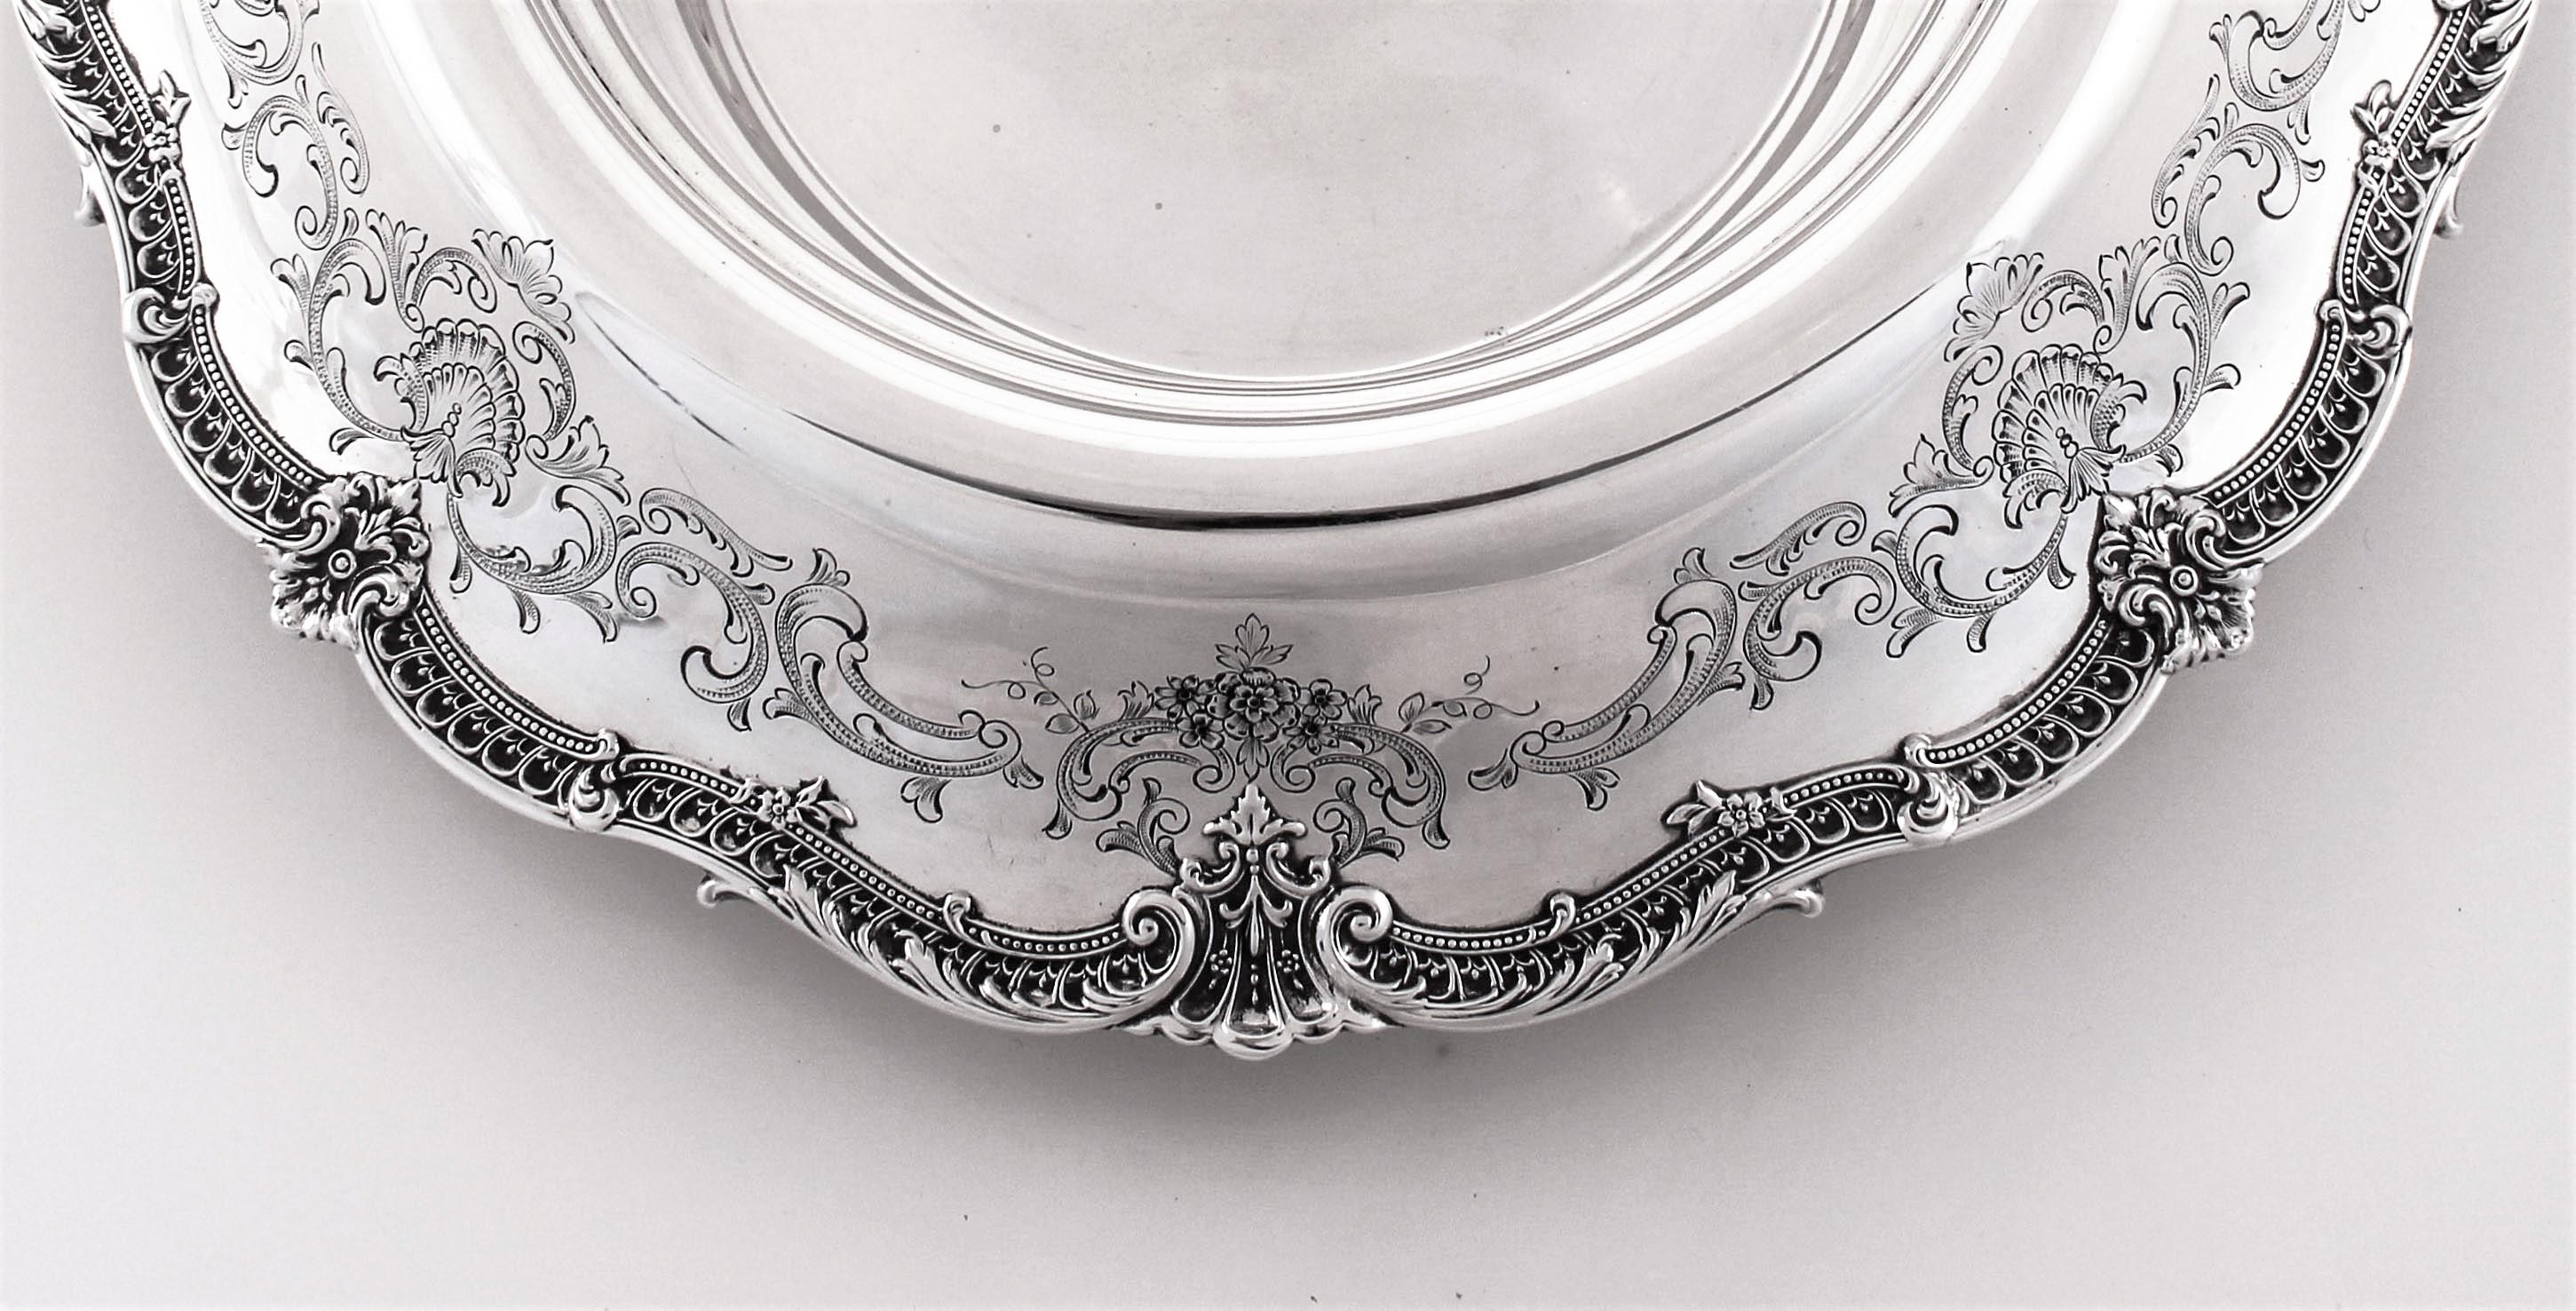 We are proud to offer this sterling silver centerpiece bowl by Graff, Washbourne and Dunn of New York. It is a beautiful antique piece from a period when entertaining was an art onto itself and there was an appreciation for the finer things in life.